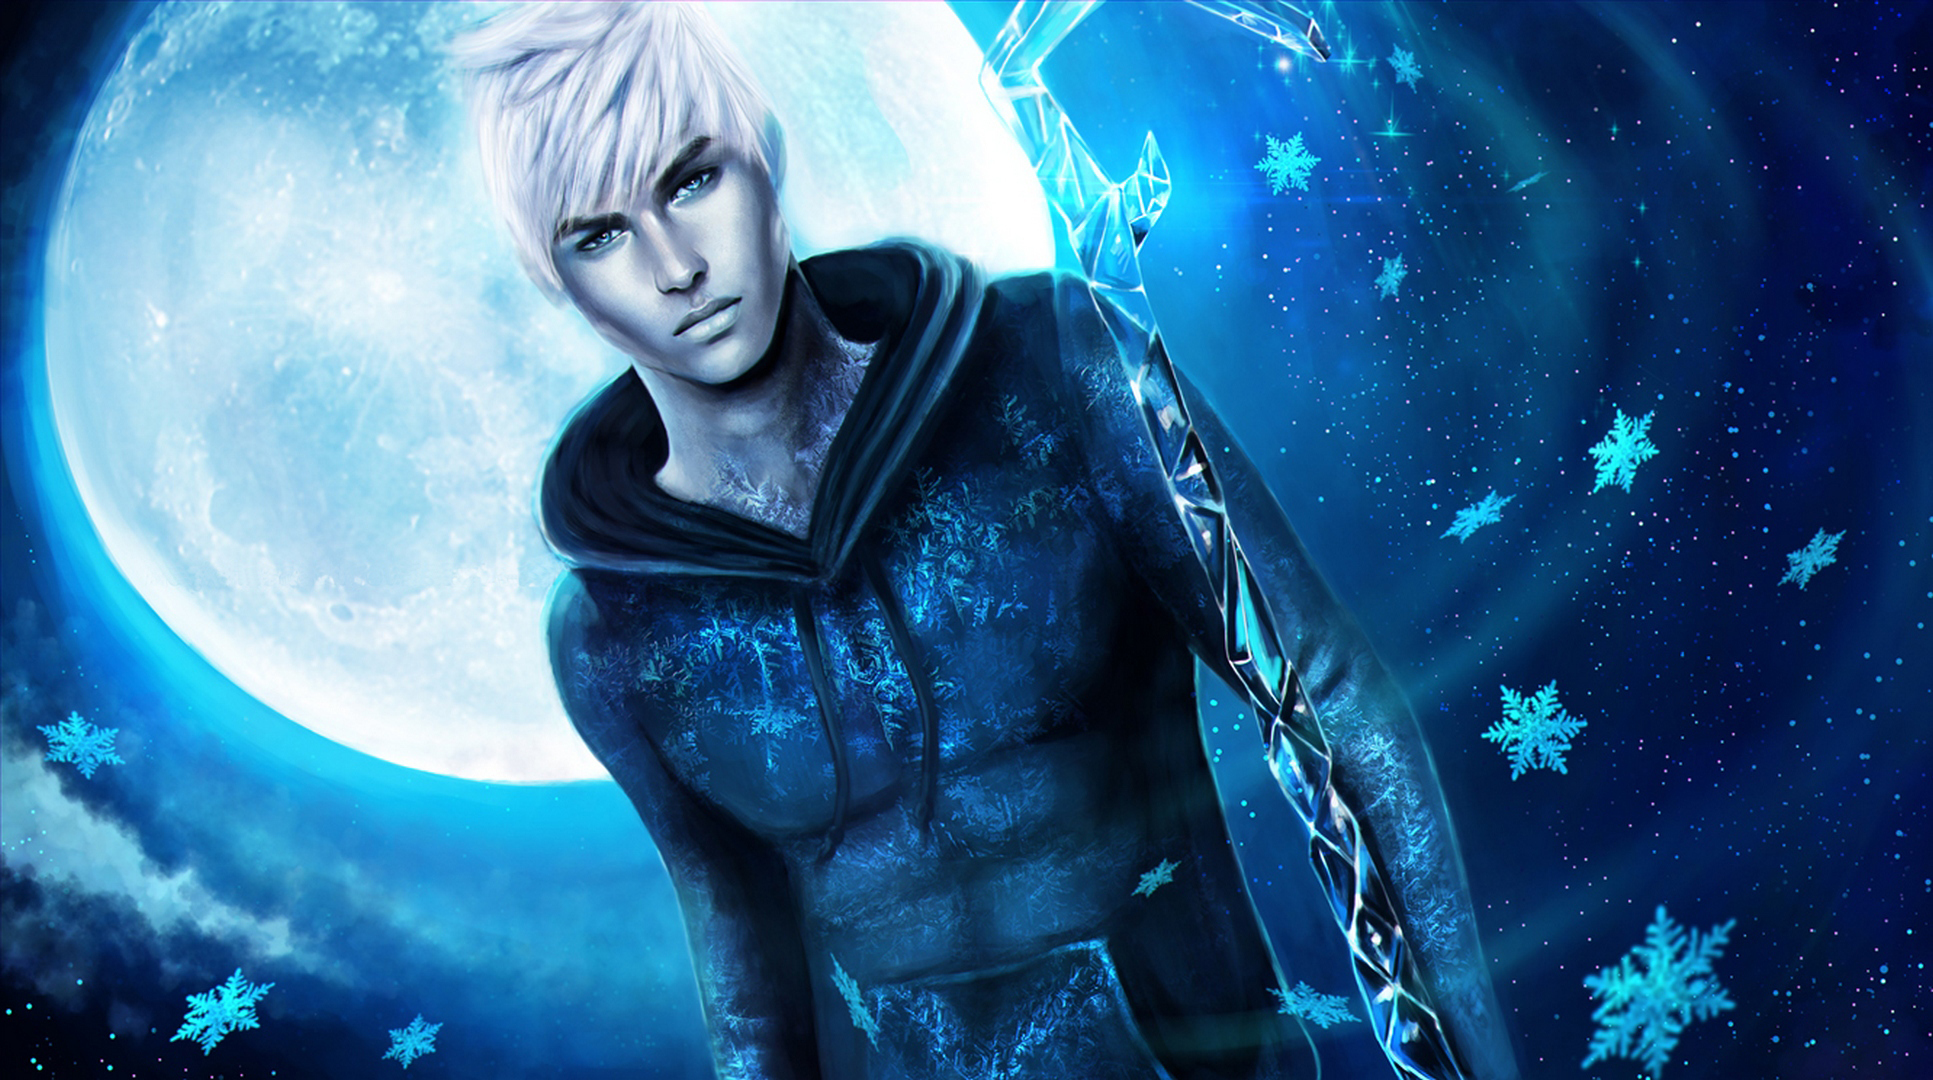 snowflakes, winter spirit, ice jack, jack frost HD Wallpaper for Phone